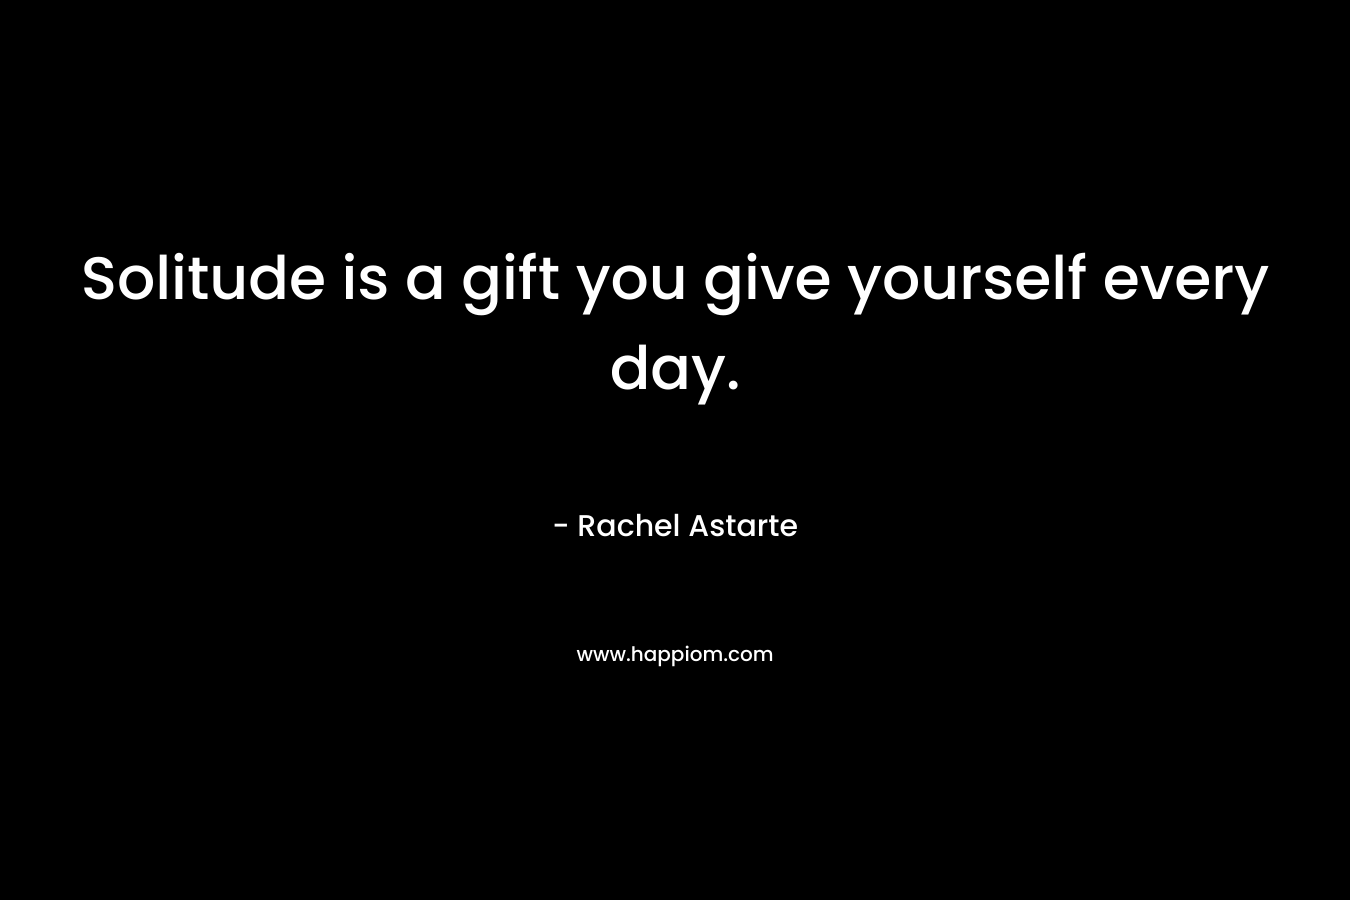 Solitude is a gift you give yourself every day.